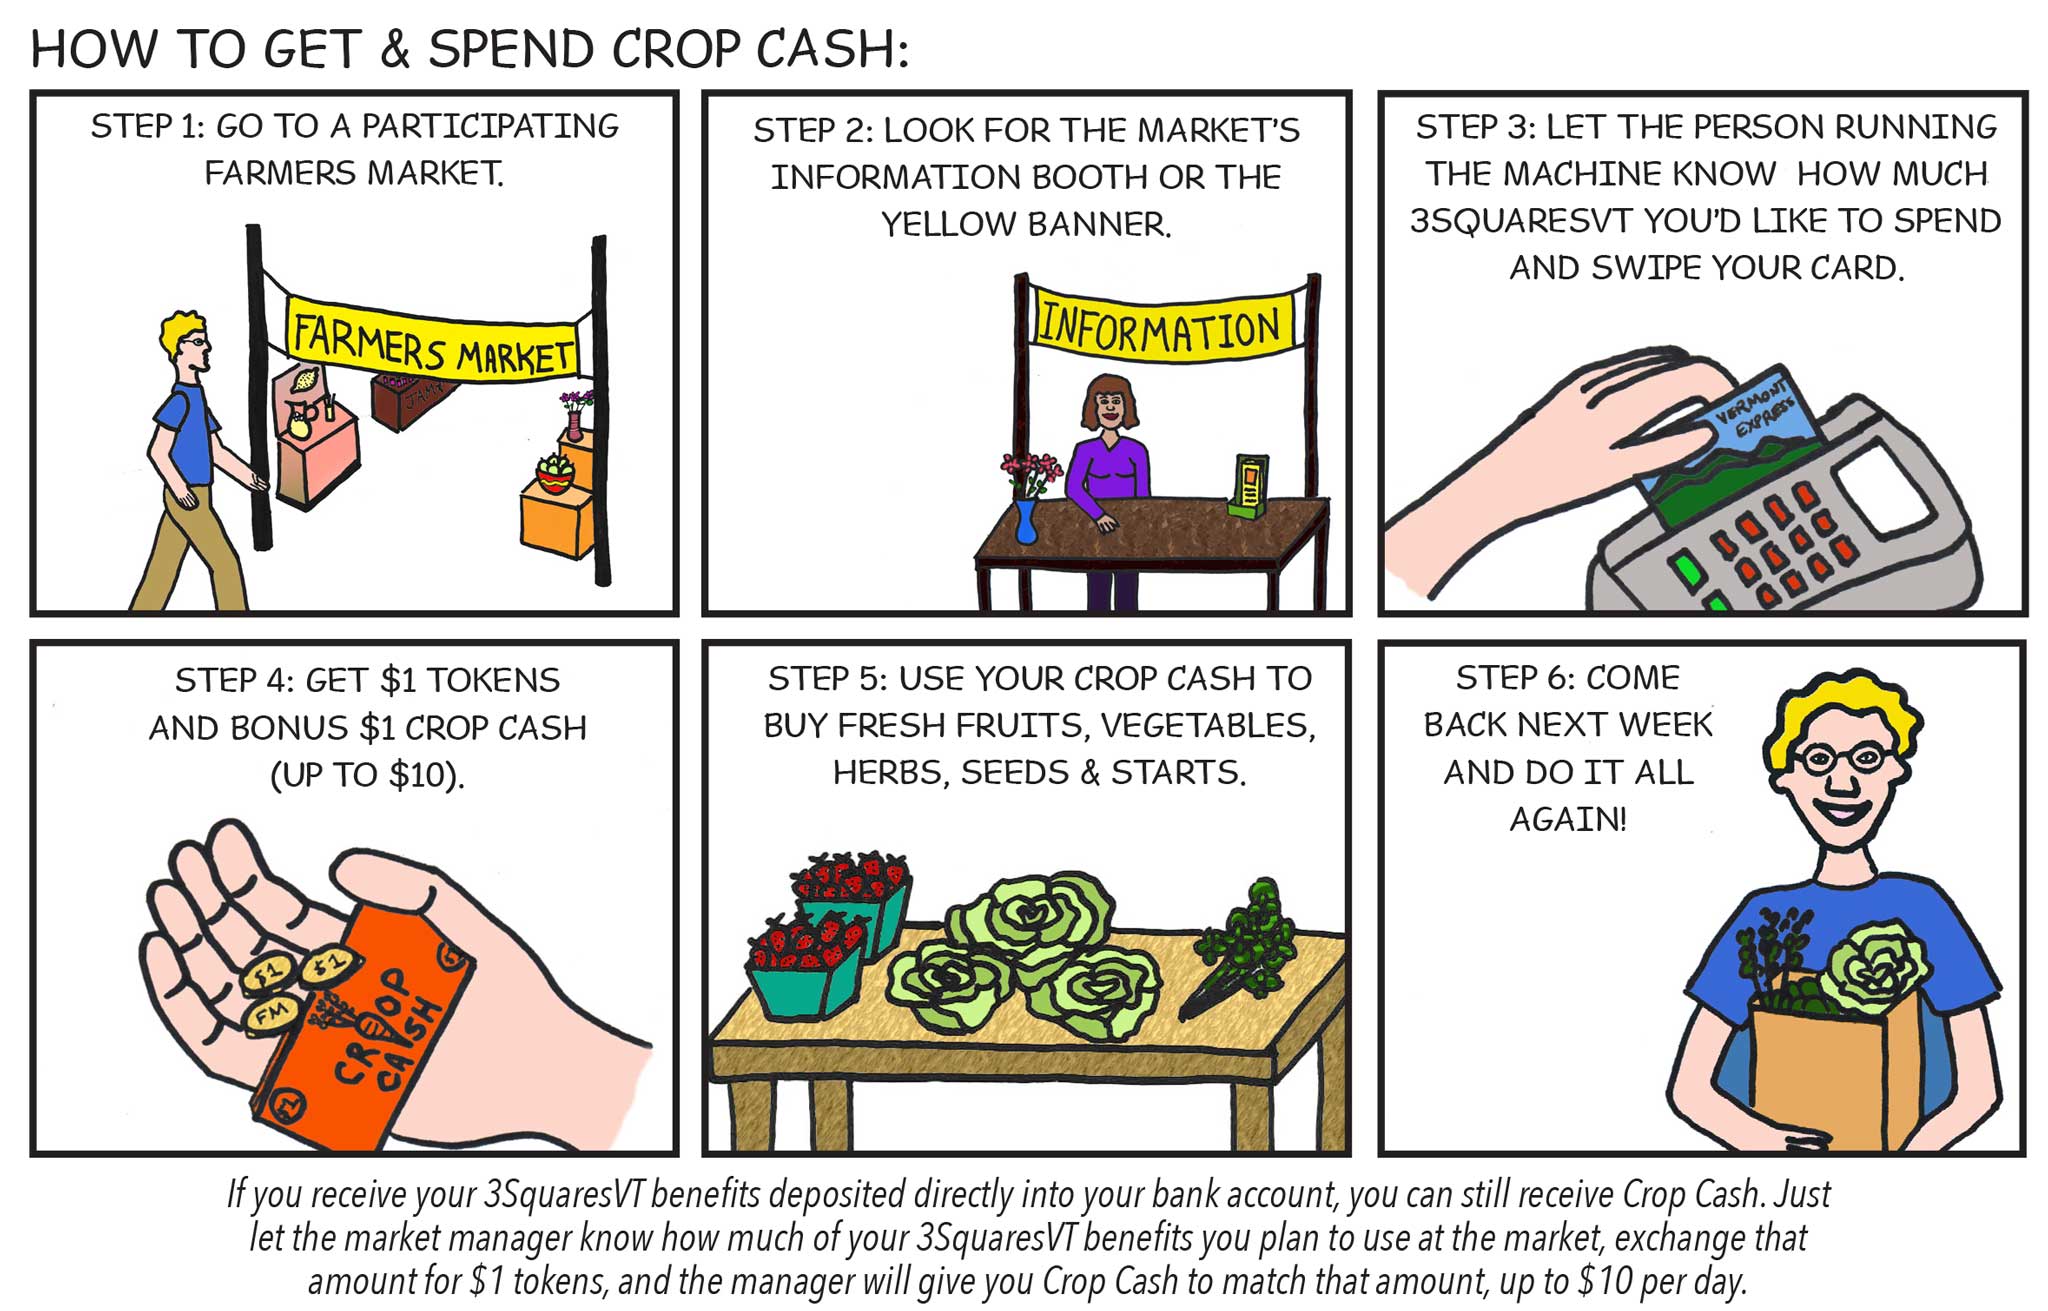 Comic about using 3SquaresVT benefits at farmers markets.